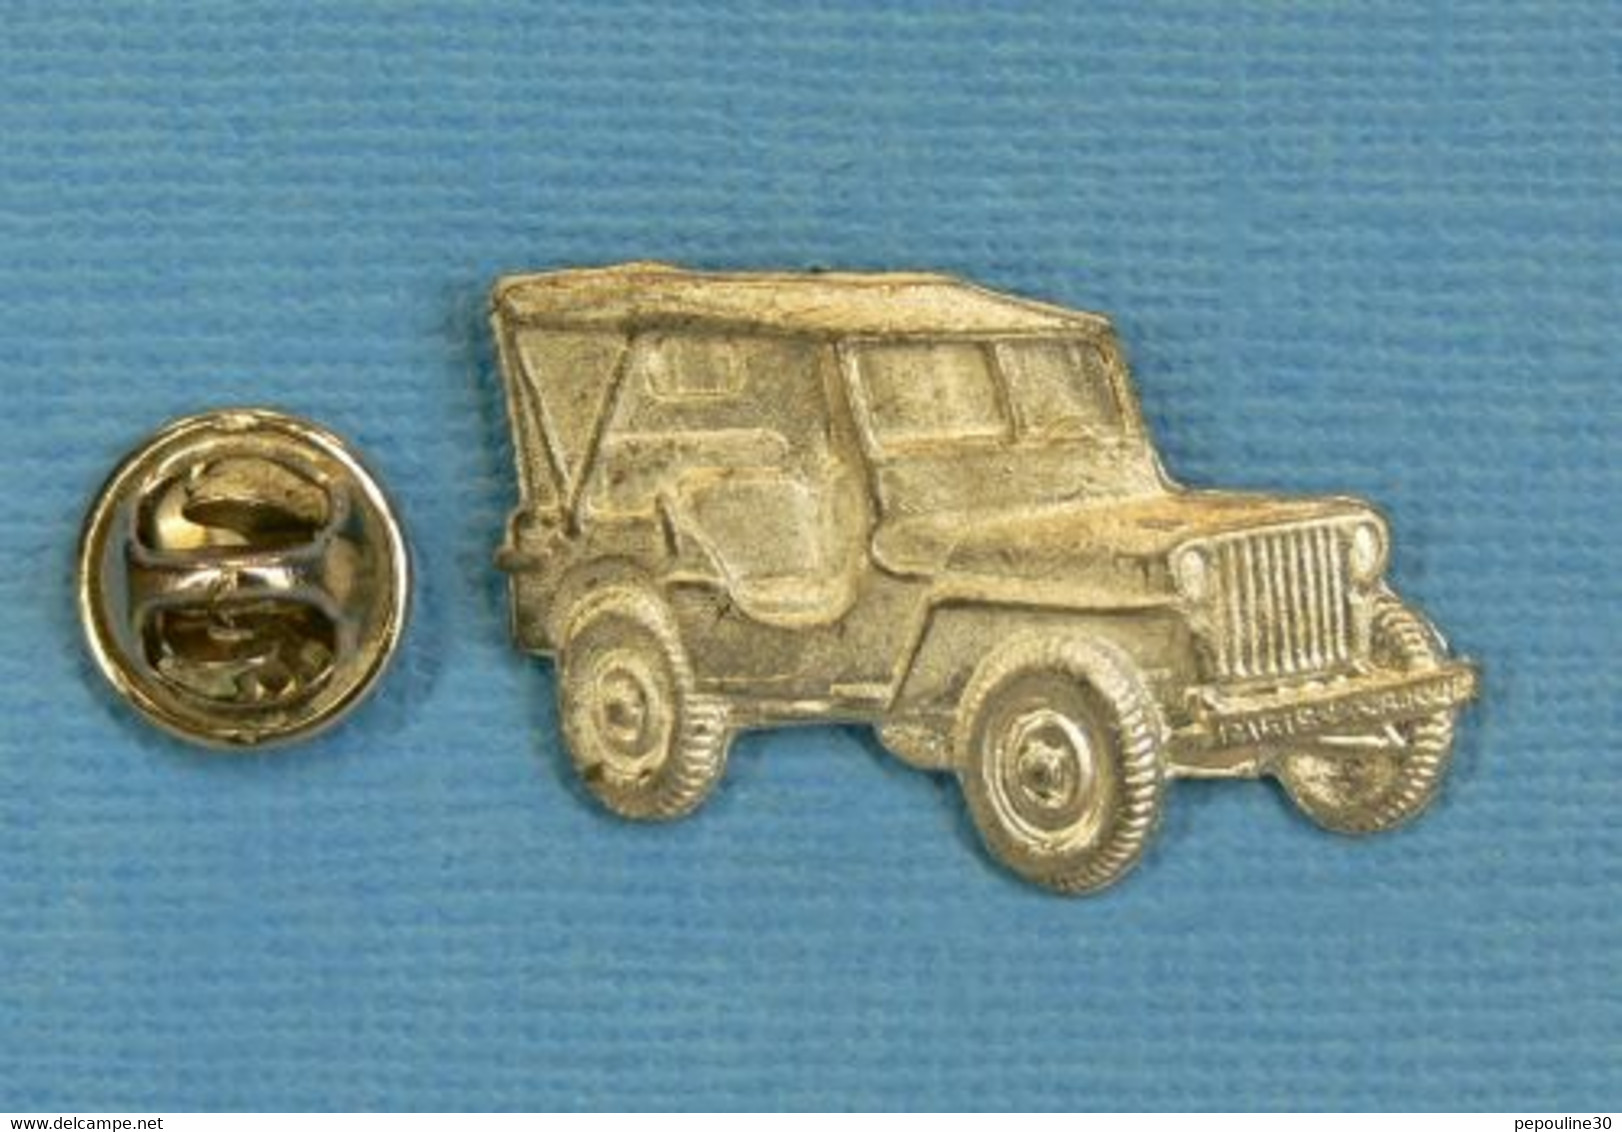 1 PIN'S //  ** JEEP WILLYS / MB / OVERLAND / FORD ** - Ford